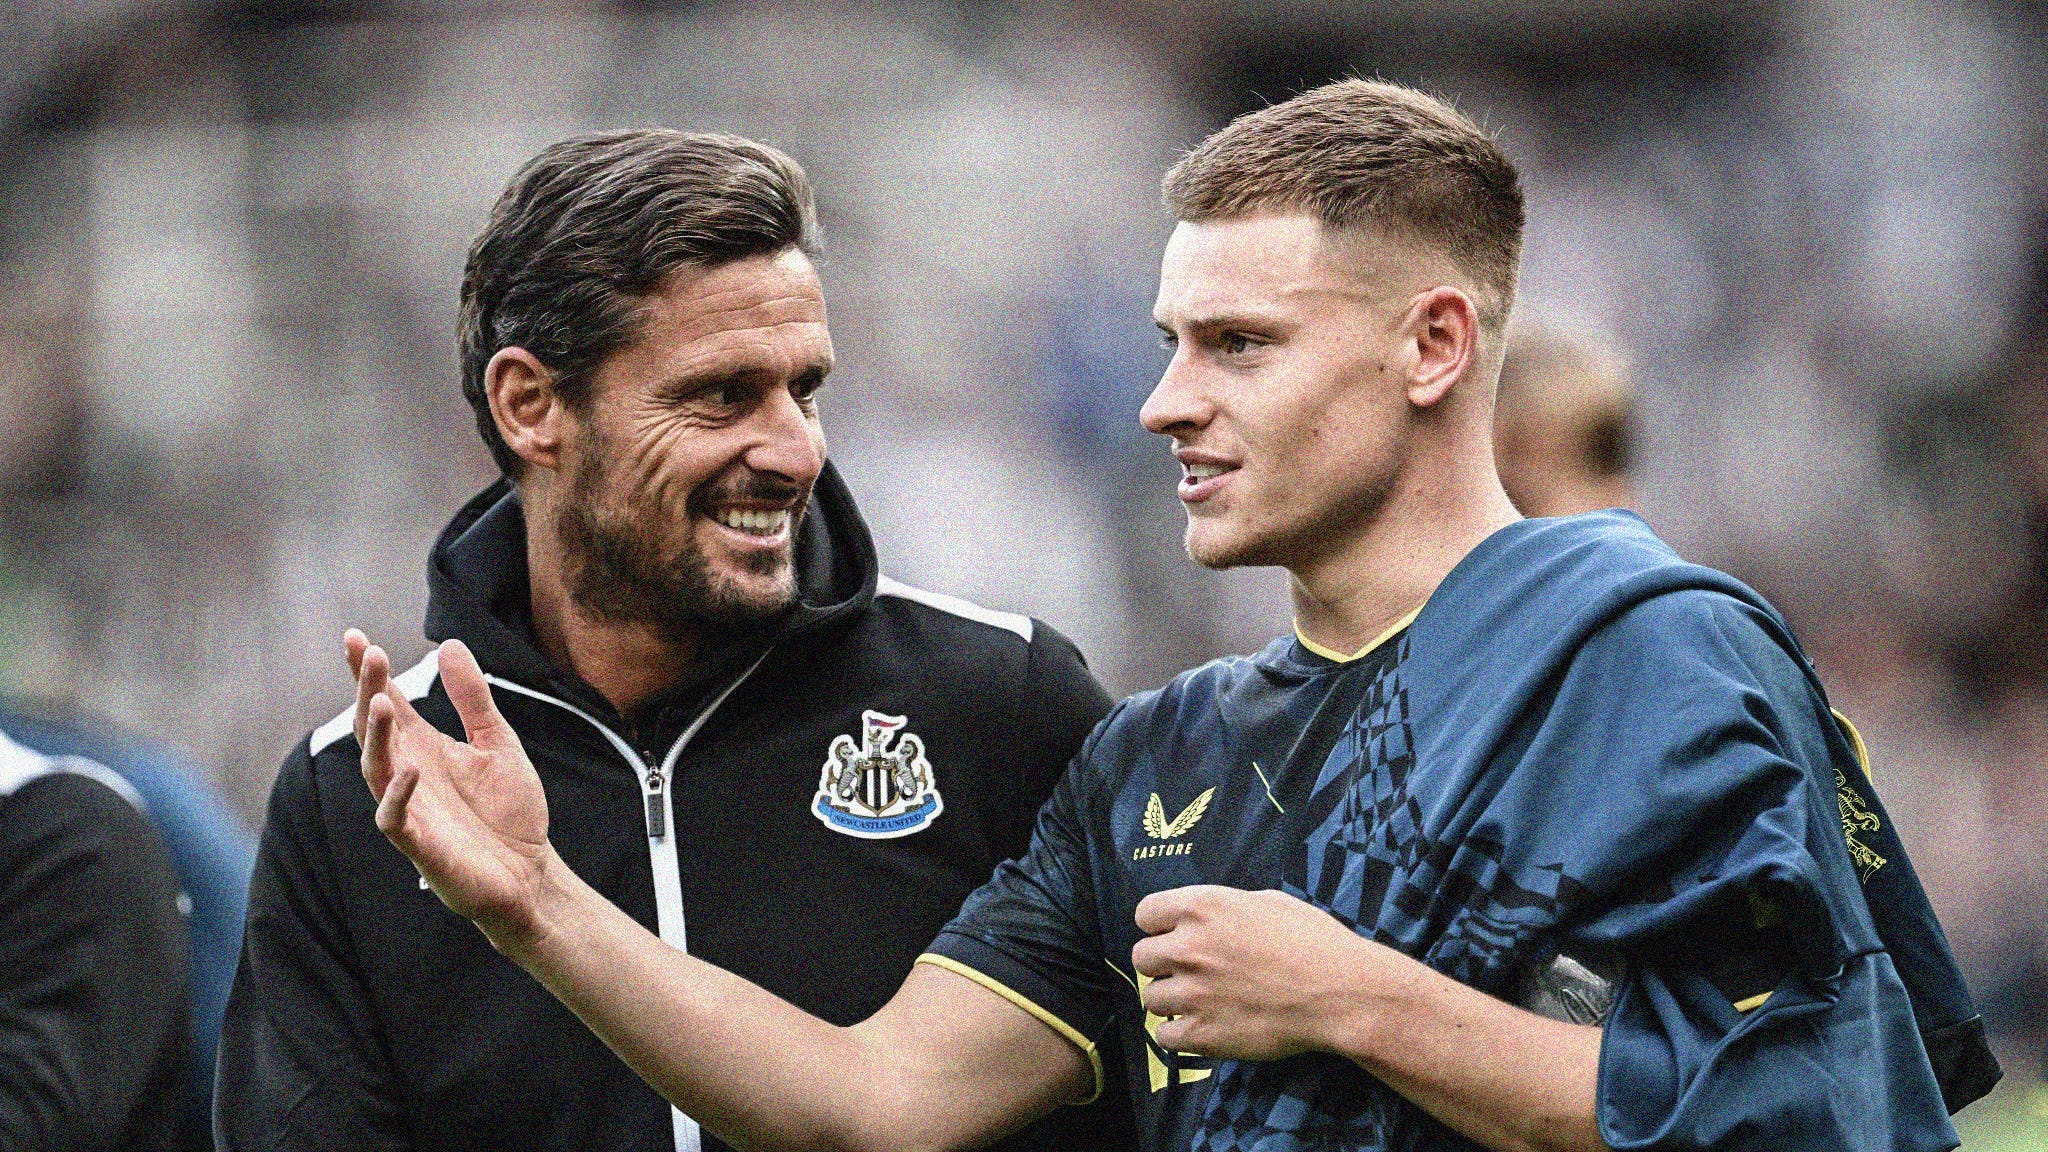 A photo featuring a smiling Jason Tindall and Harvey Barnes